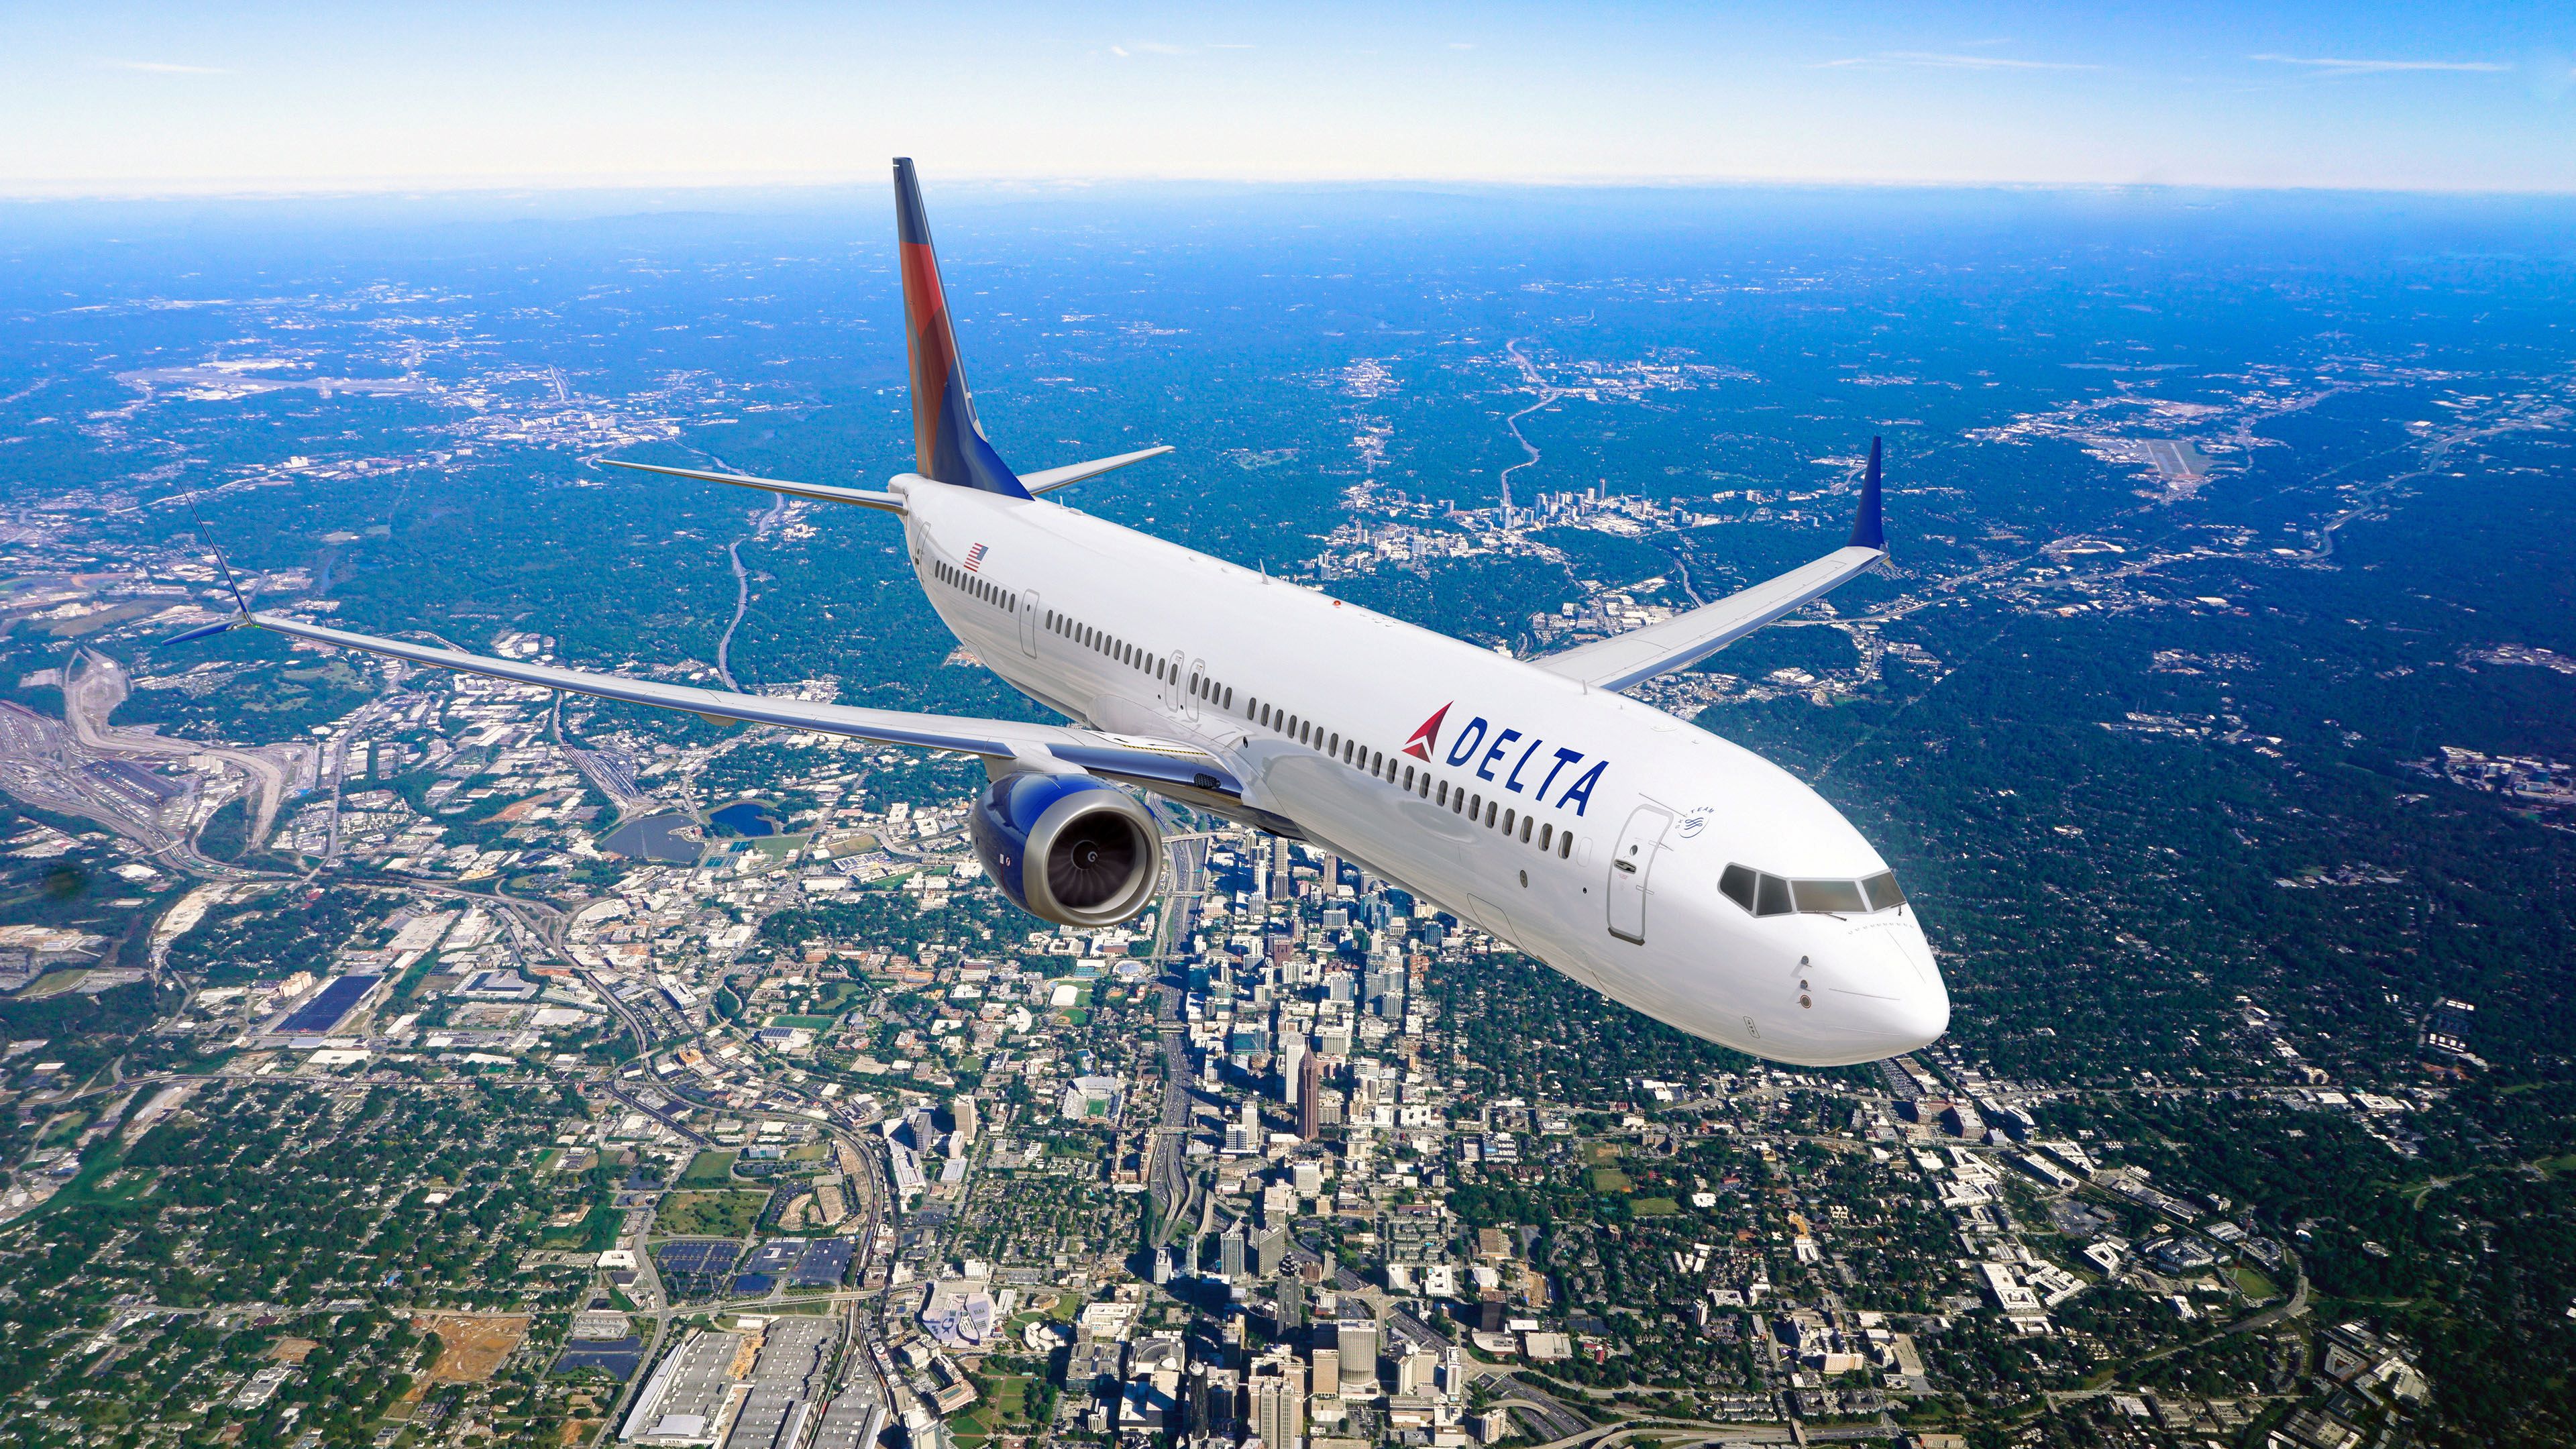 Delta adds state-of-the-art, fuel-efficient Boeing 737 MAX to fleet | Delta News Hub